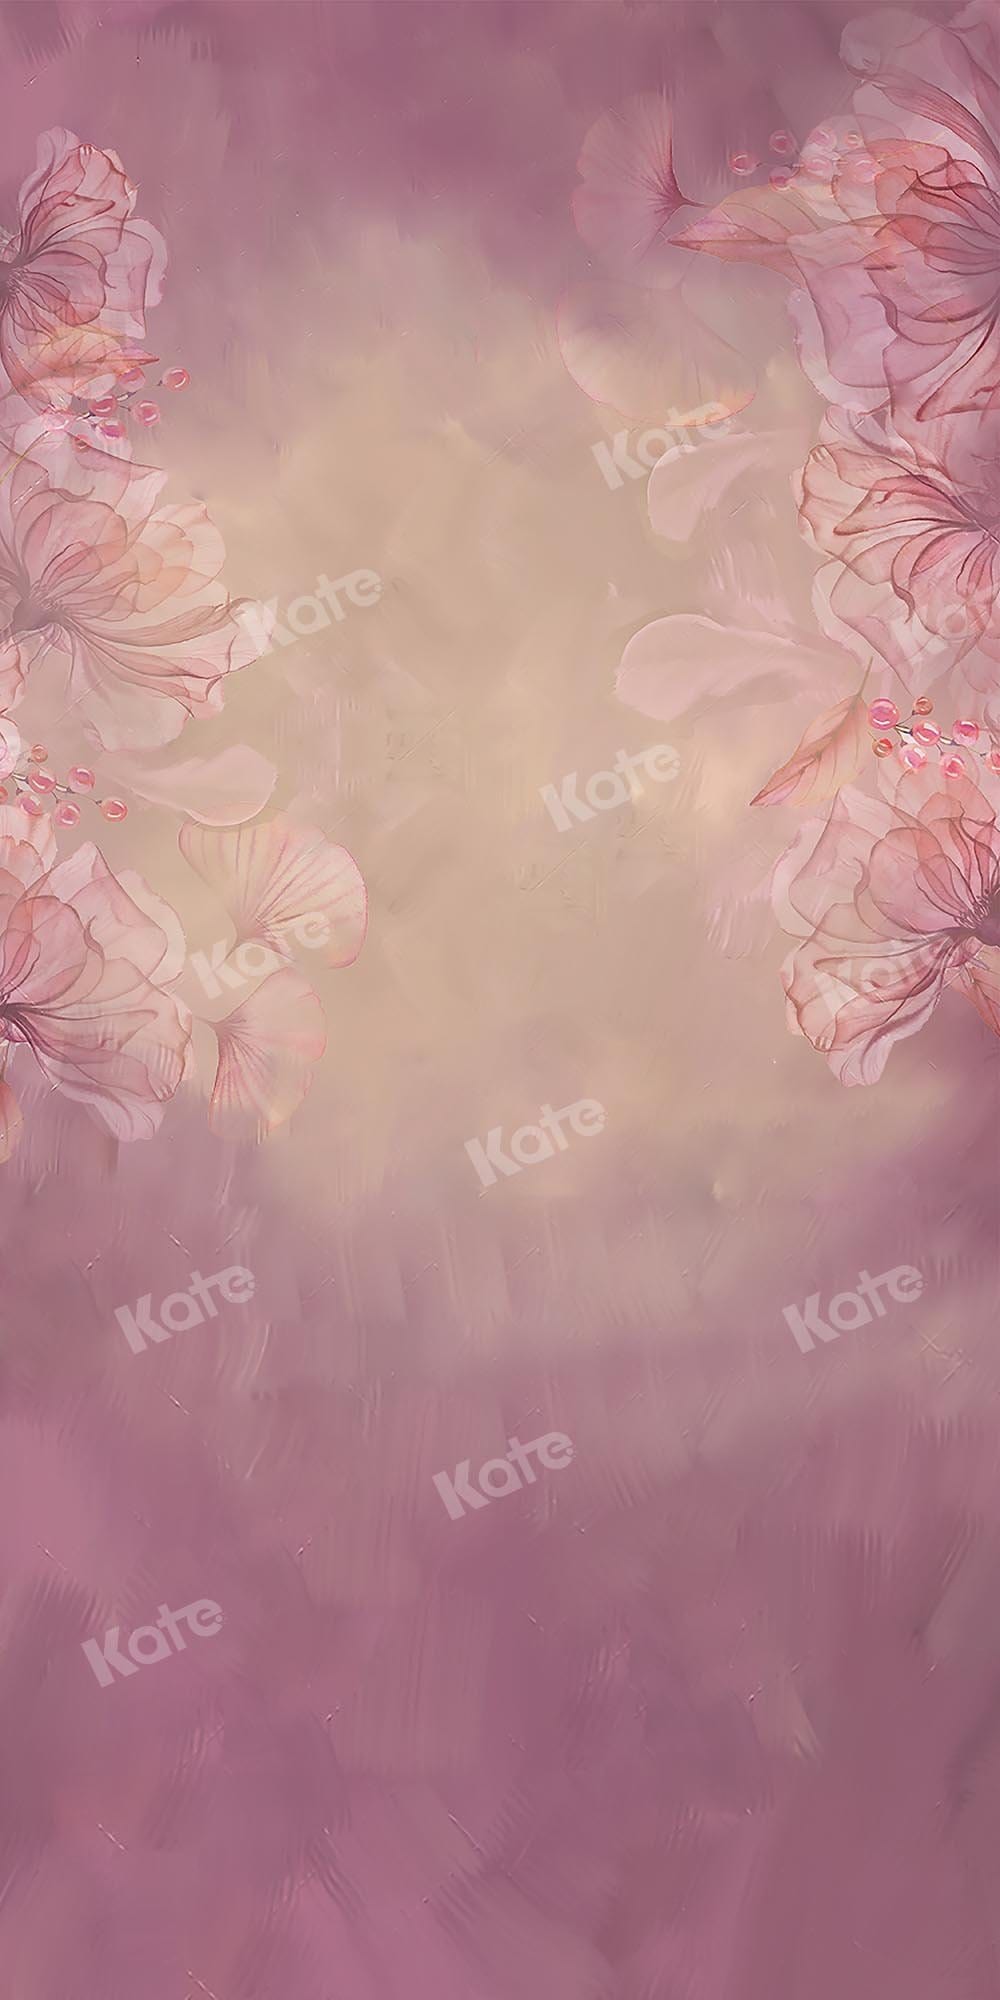 Kate Sweep Fine Art Floral Blurry Pink Backdrop Designed by GQ - Kate Backdrop